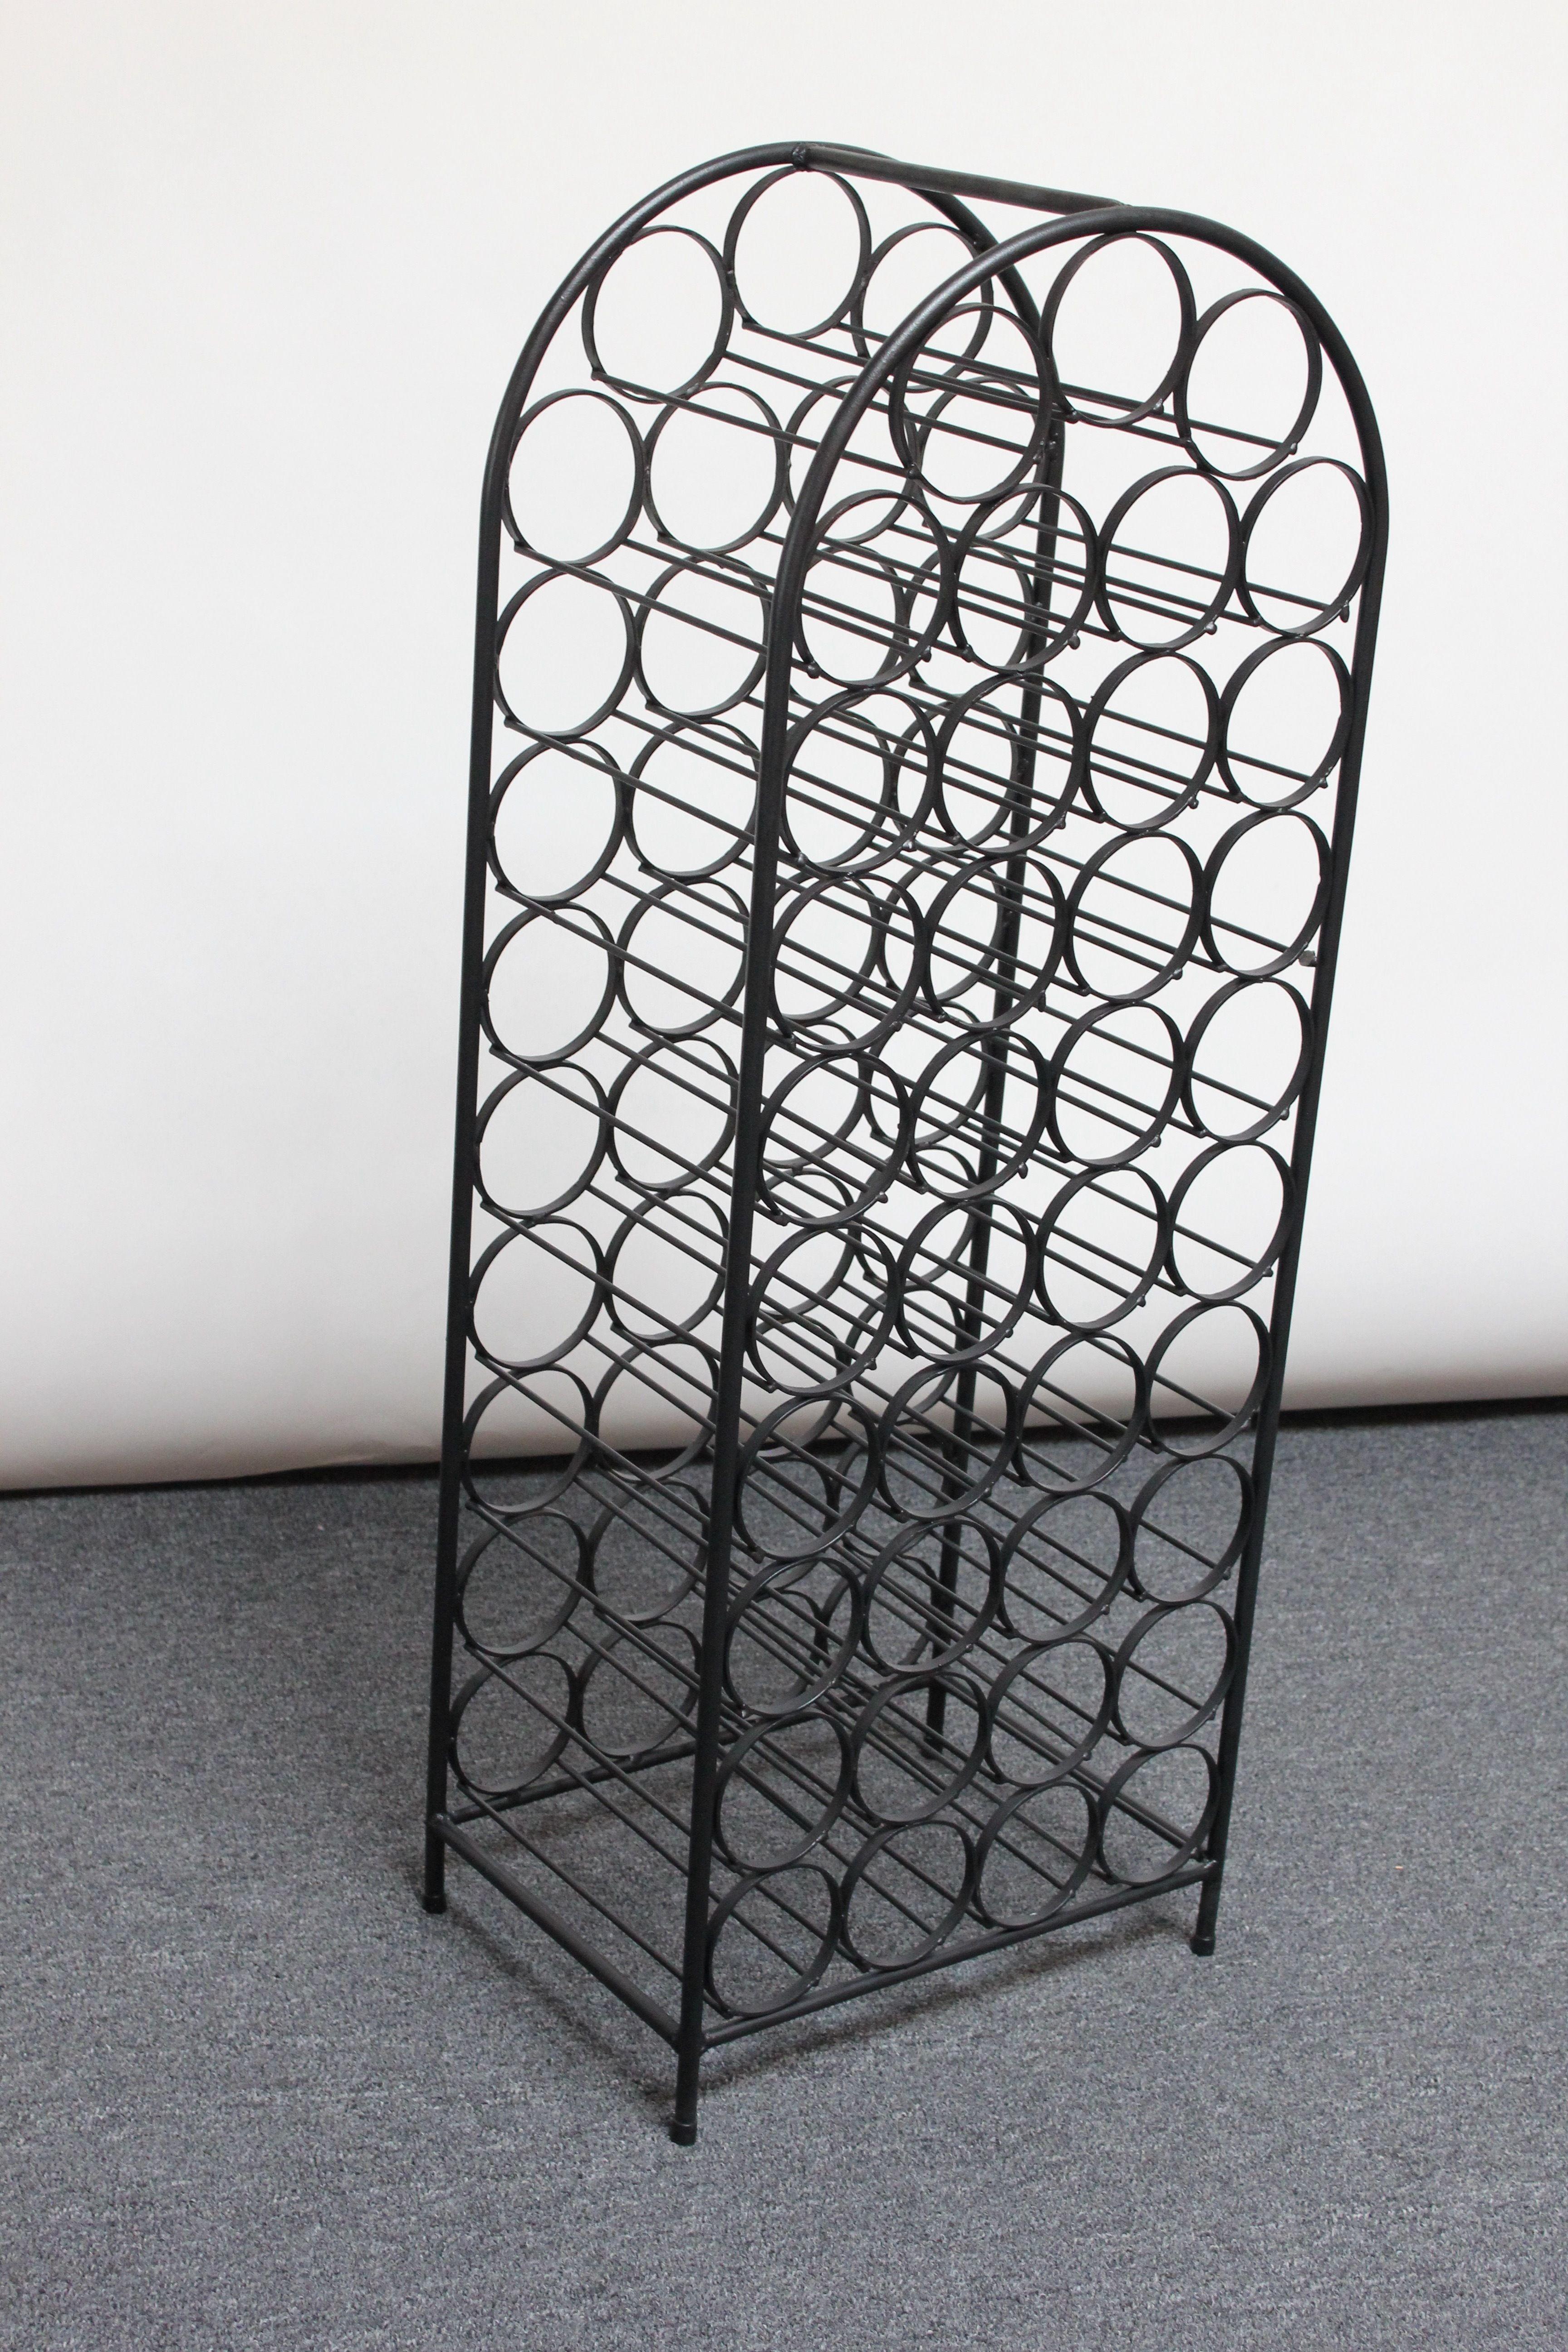 Arched wrought iron wine rack accommodating 39 wine bottles designed by Arthur Umanoff for Shaver Howard and distributed by Raymor.  Graceful form and intriguing visual effect from angles that meld the rods and circles together. Near mint, restored